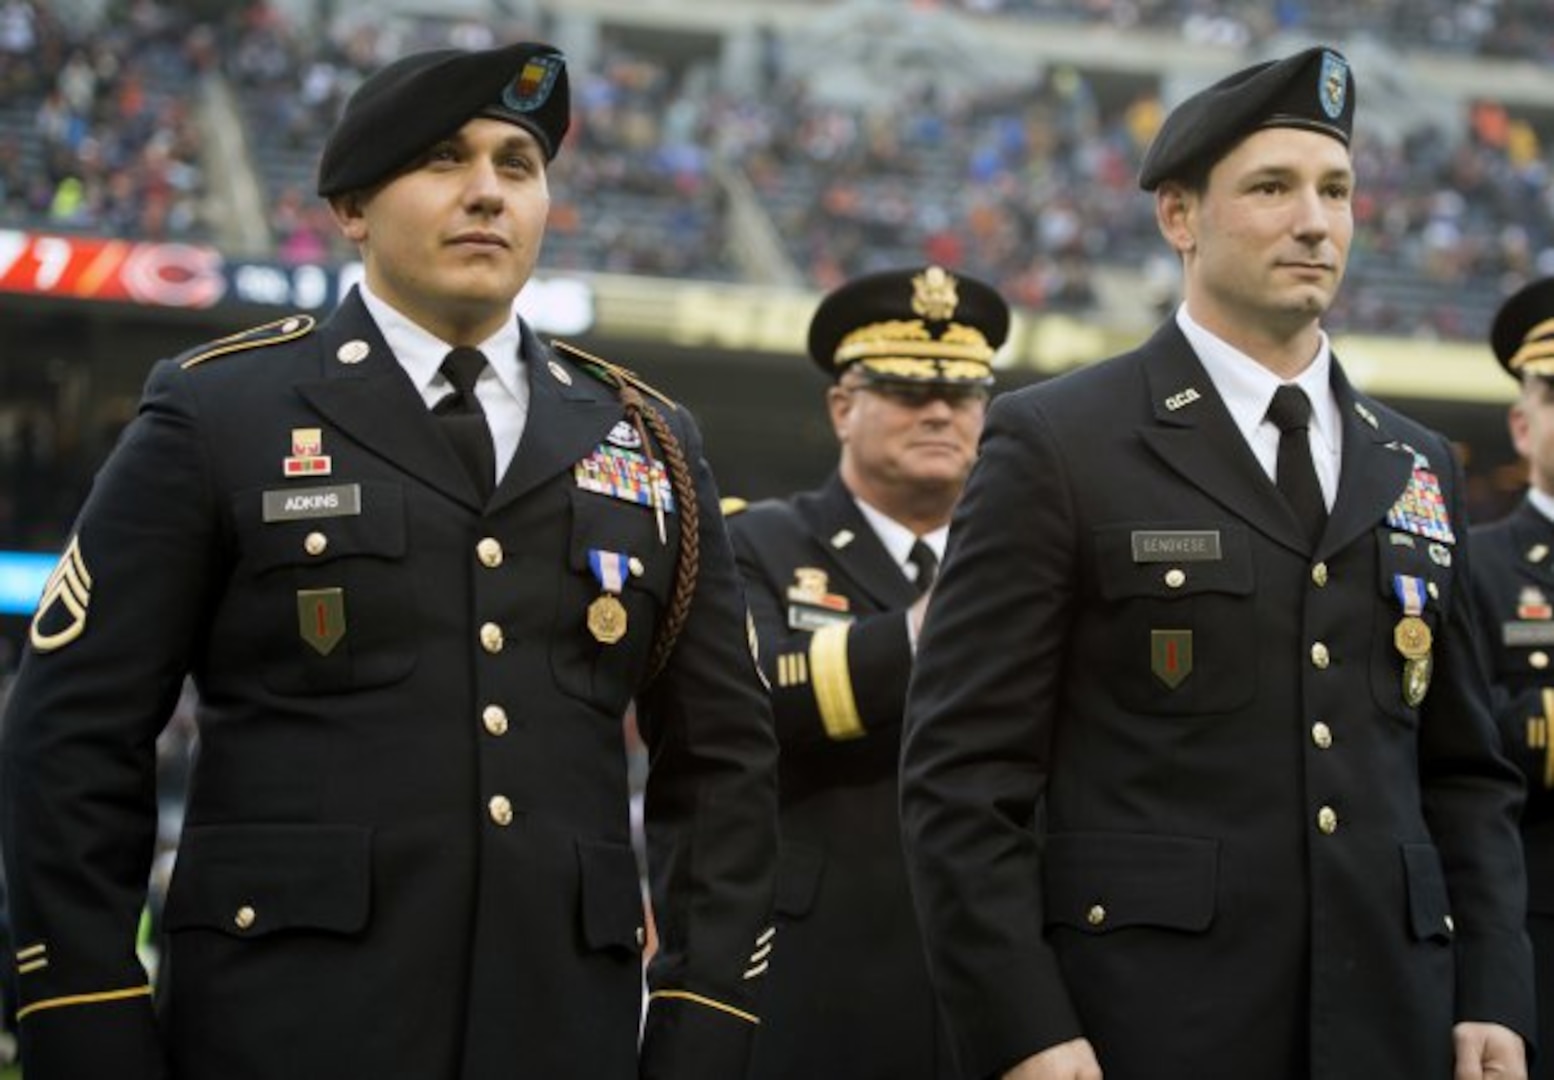 Illinois Army National Guard Staff Sgt. Jeremy Adkins, left, and Officer Candidate Tony Genovese, both of Chicago, stand at attention in the center of Soldiers Field to be recognized by the crowd prior to them being awarded the Soldiers Medal during the Chicago Bears "Salute to Service" game Nov. 27, 2016. Assistant Adjutant General Brig. Gen. Michael Zerbonia is in background. The Soldiers were recognized for their bravery in pulling a driver from a burning vehicle following an accident on May 11, 2016. 